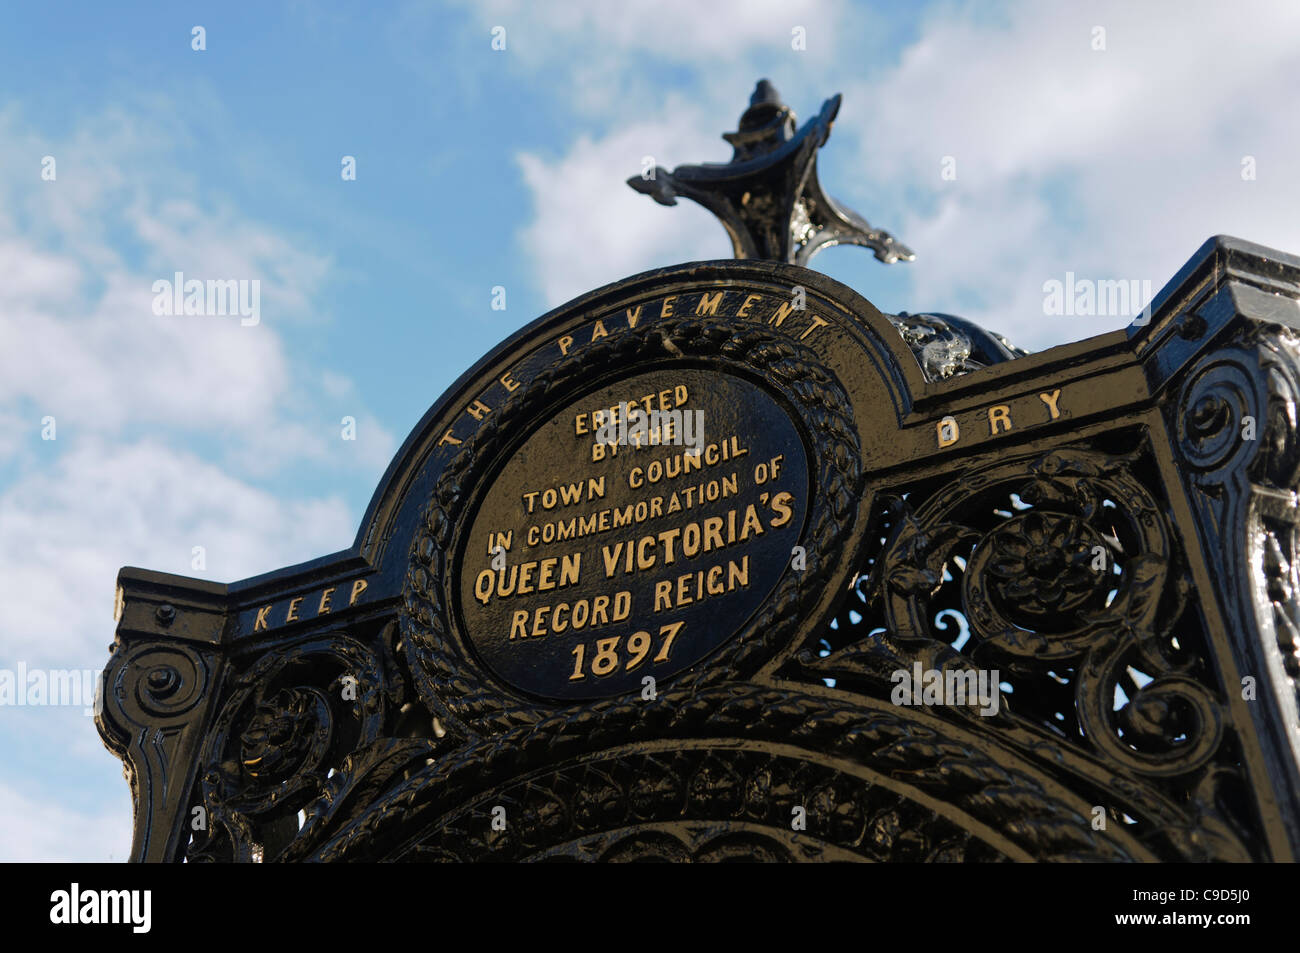 Water fountain in Stranraer, installed for Queen Victoria's Golden Jubilee, 1897 Stock Photo